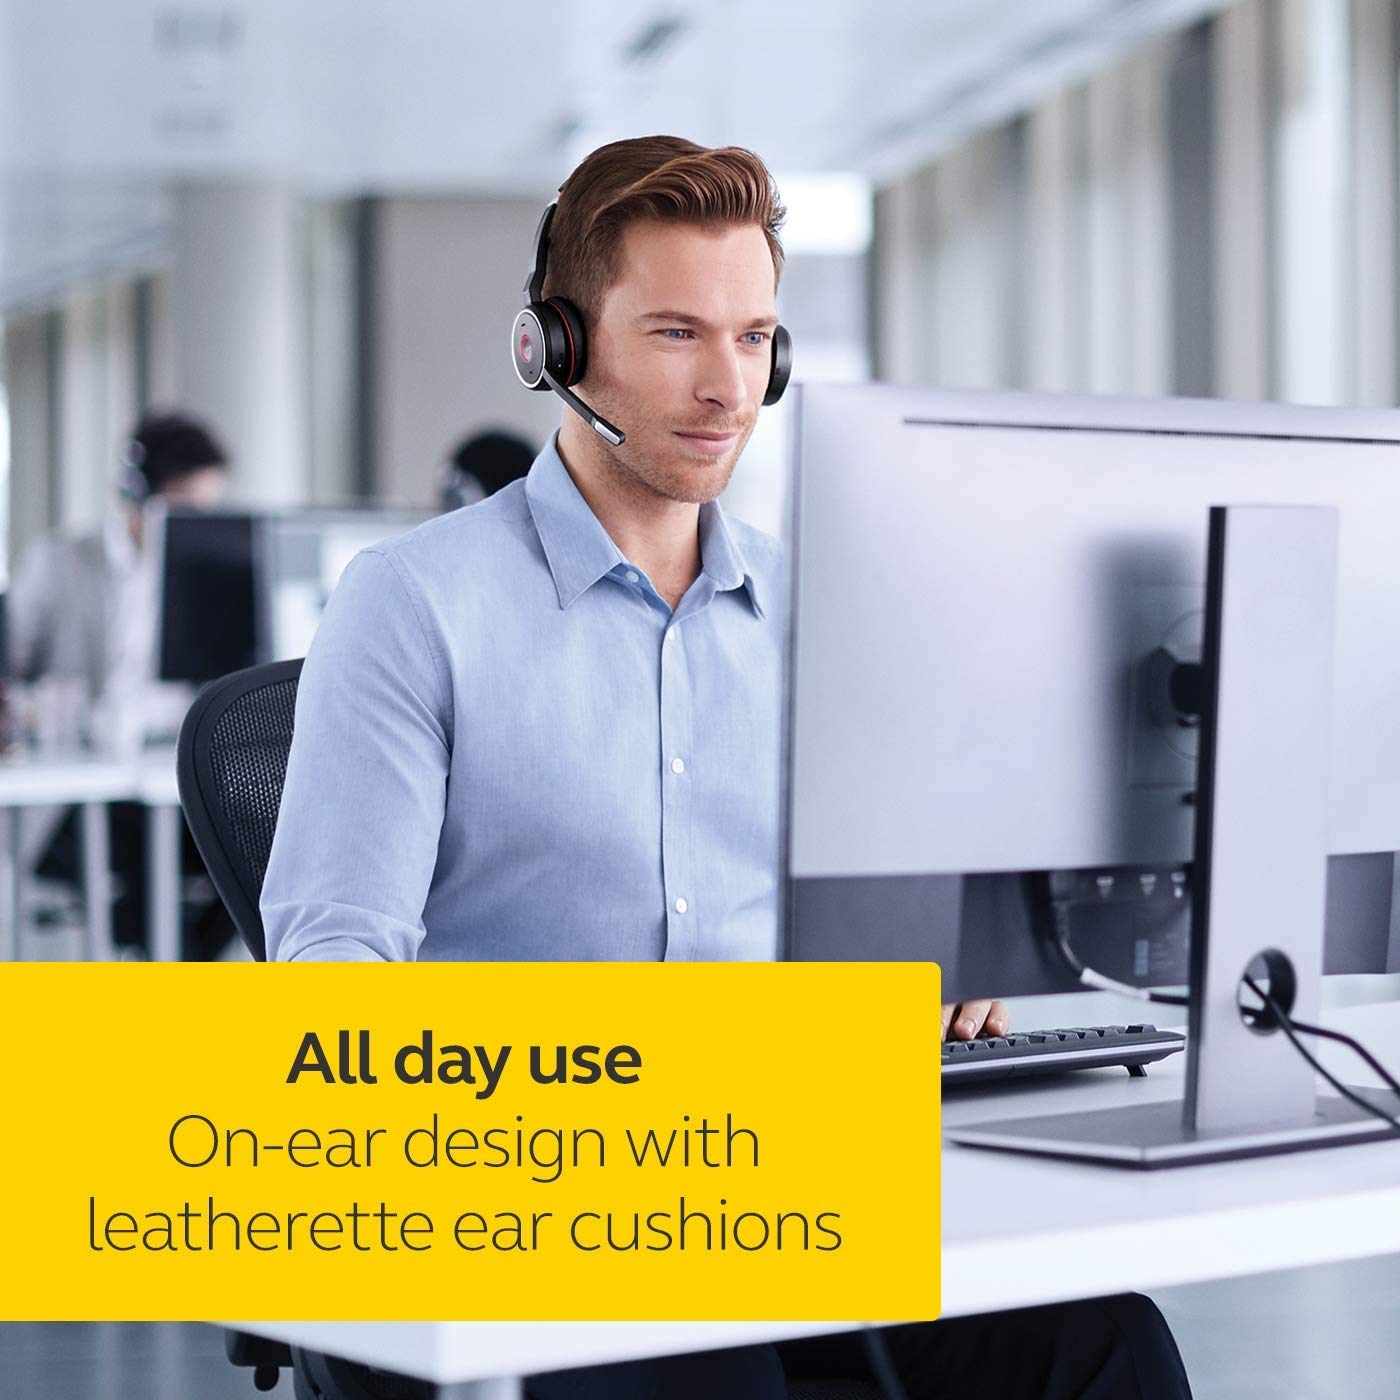 Jabra Evolve 75 MS Wireless Headset, Stereo – Includes Link 370 USB Adapter and Charging Stand – Bluetooth Headset with World-Class Speakers, Active Noise-Cancelling Microphone, All Day Battery